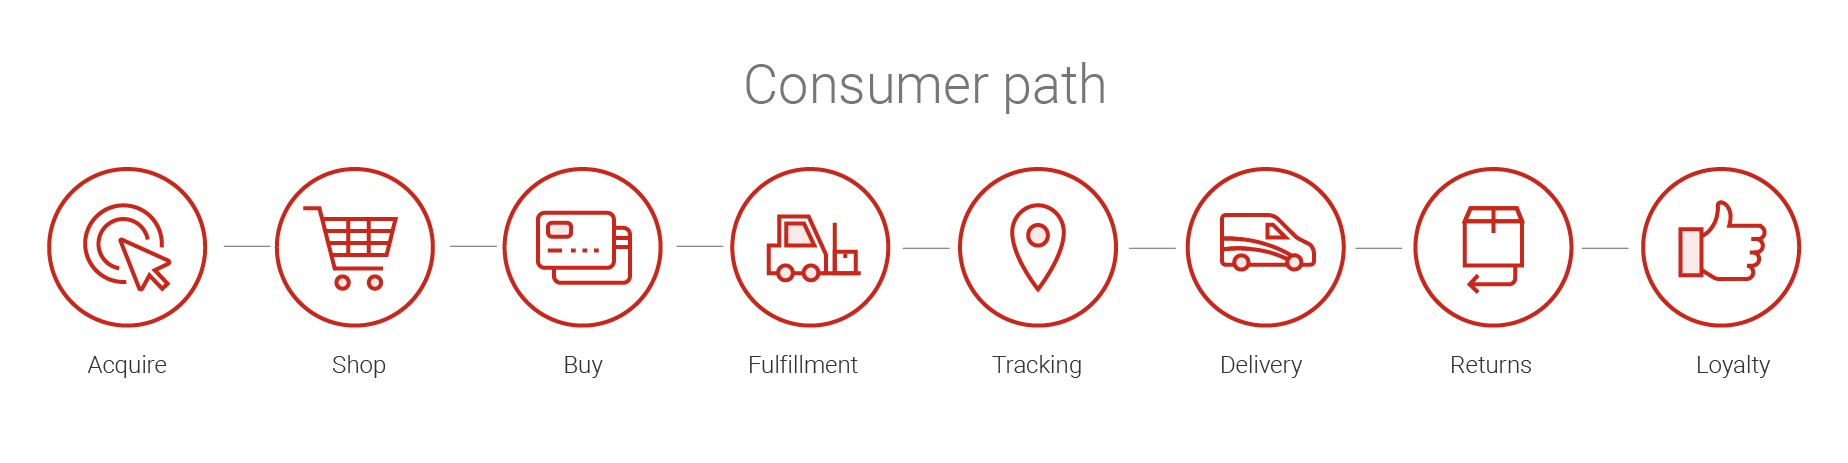 Infographic. The consumer path: acquire, shop, buy, fulfillment, tracking, delivery, returns and loyalty.